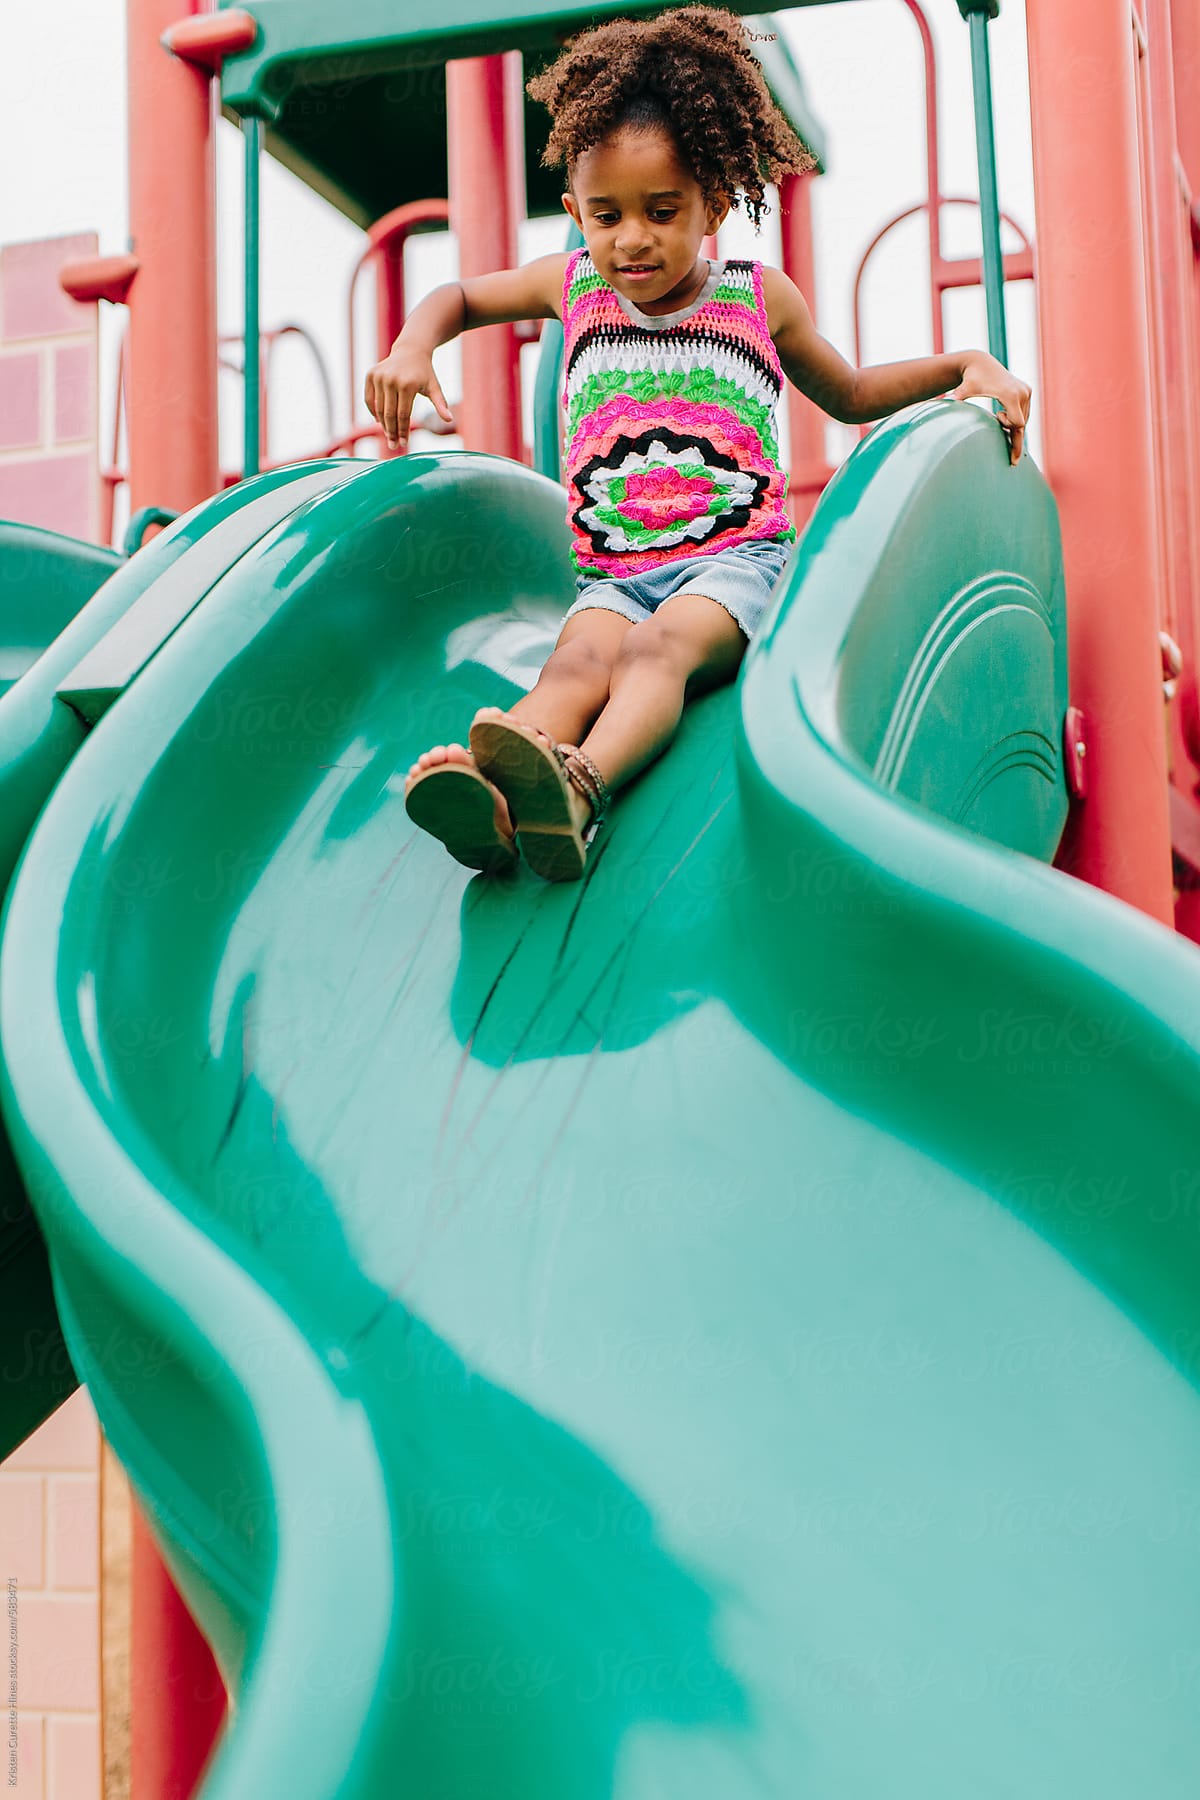 A Little Girl Sliding Down A Green Slide At The Playground. by